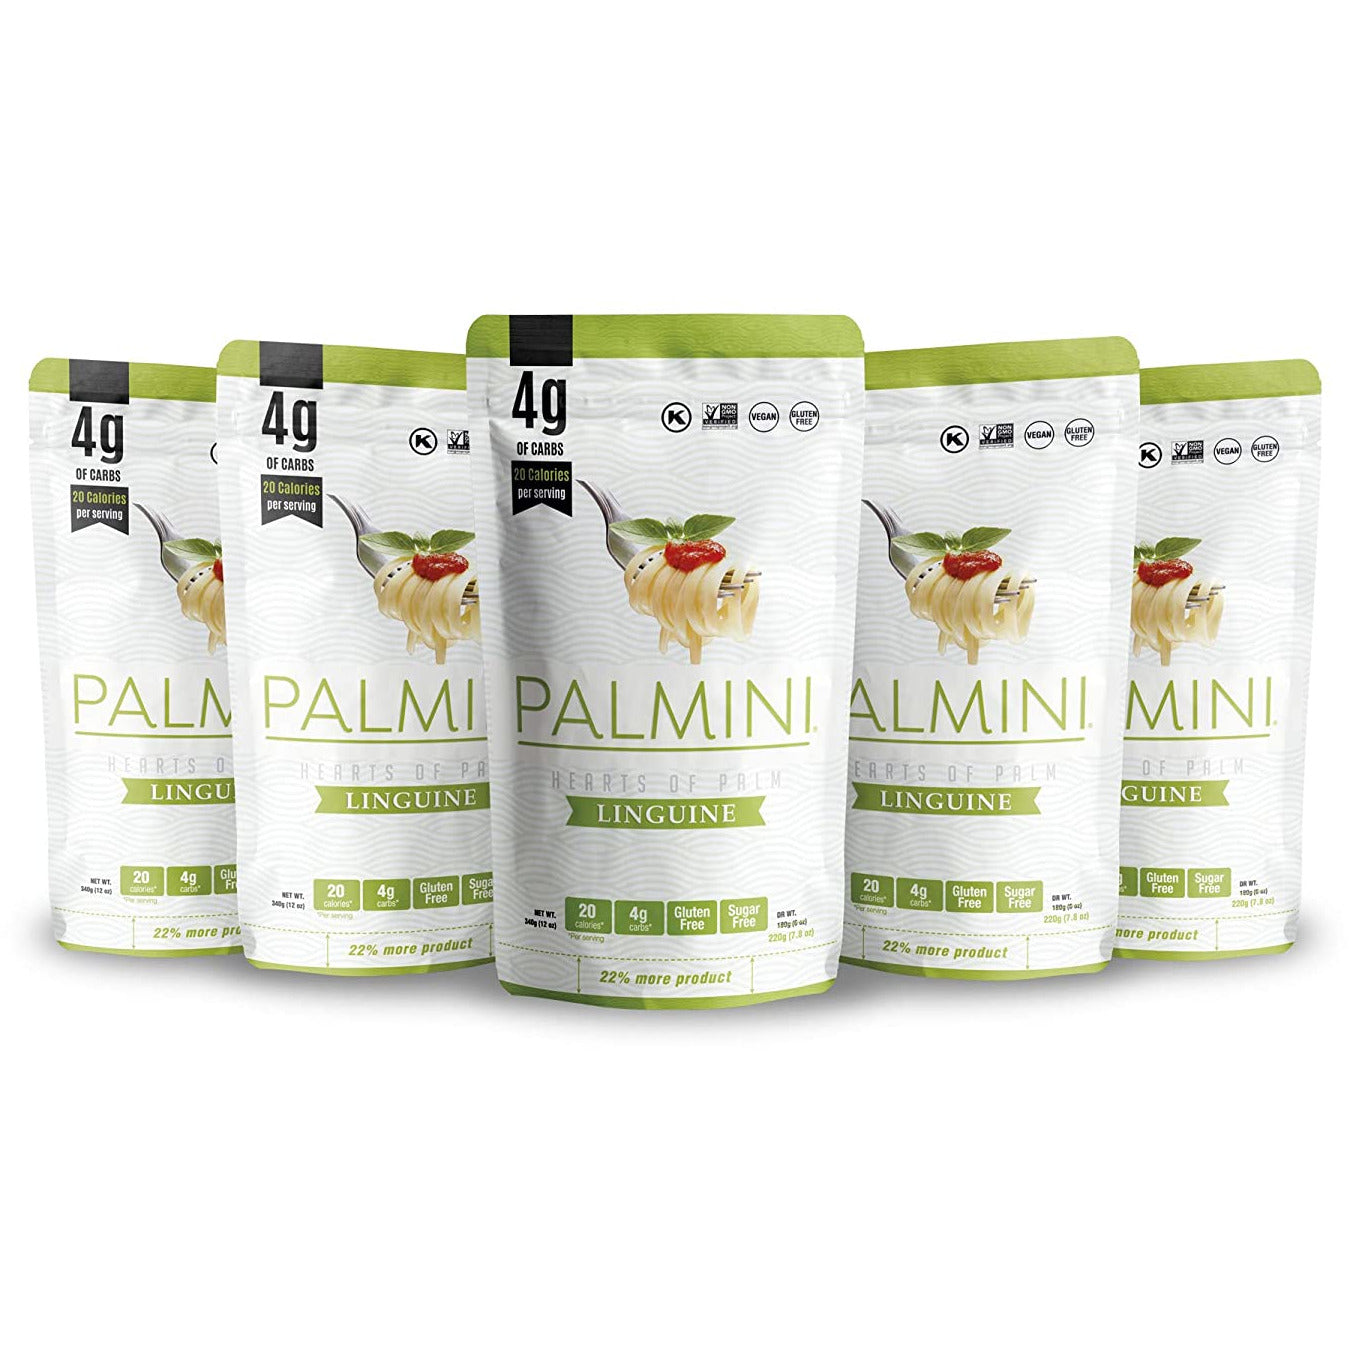 Palmini Low Carb Linguine 12 Ounce - Pack of 6